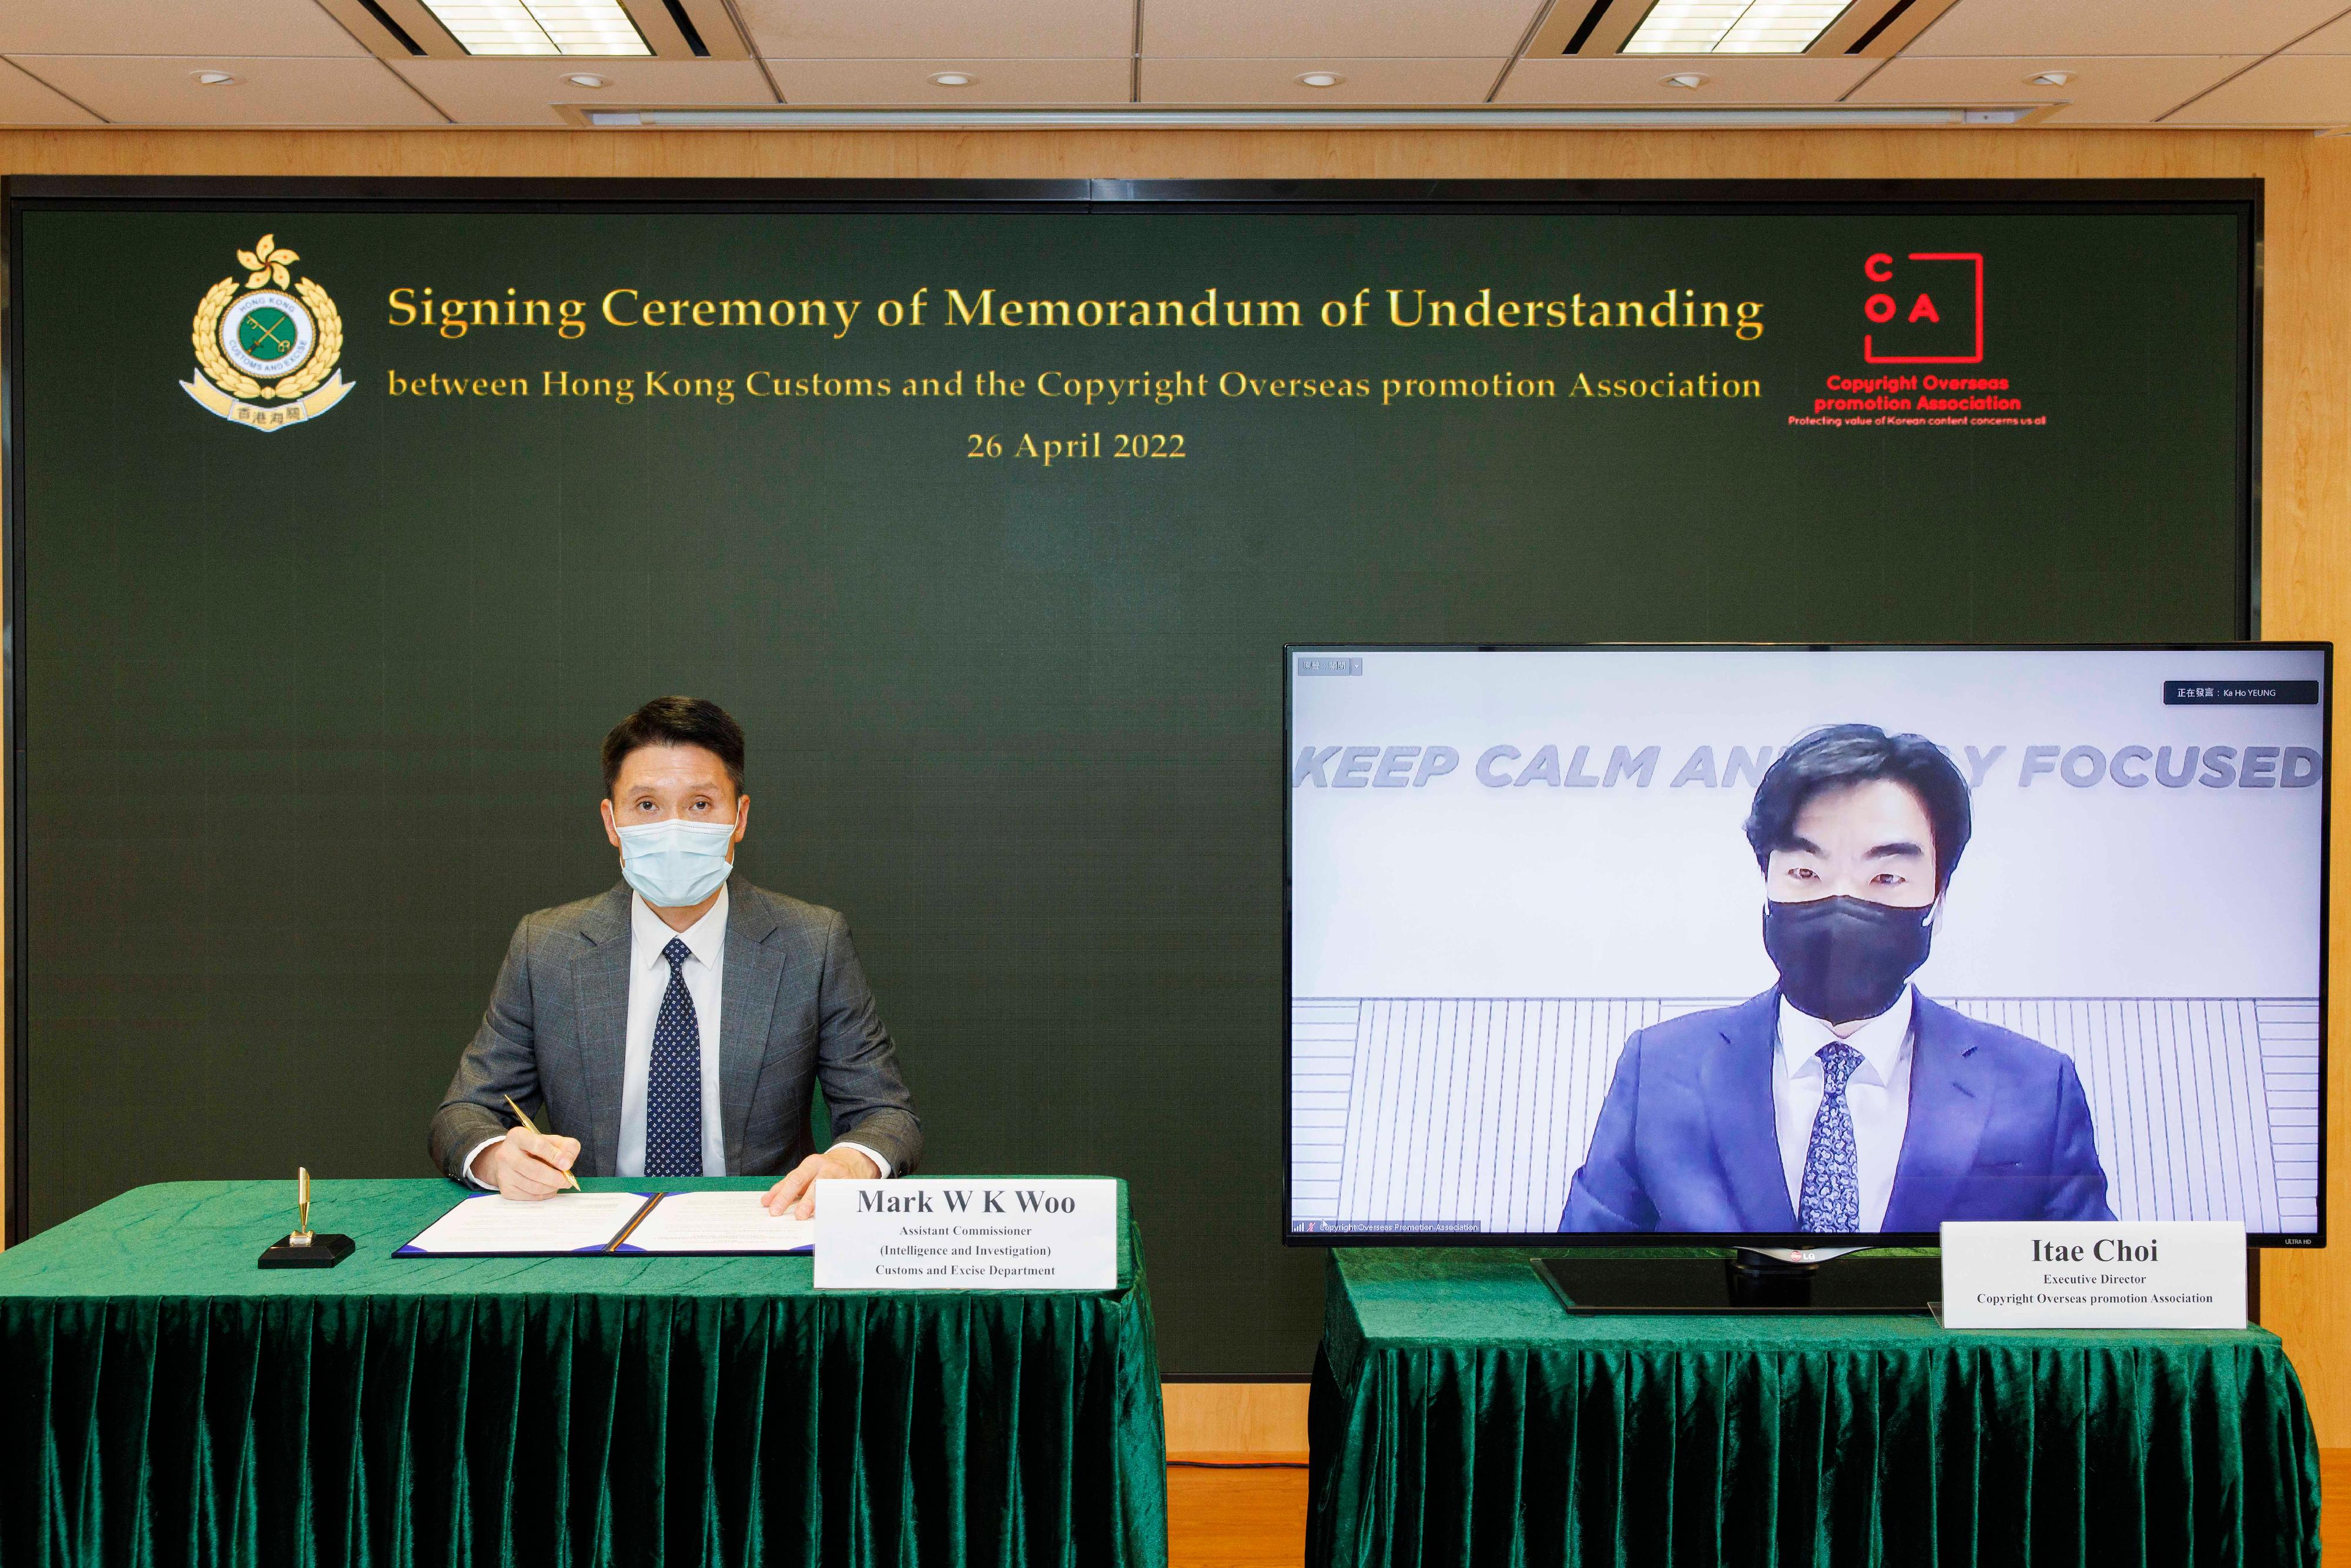 The Assistant Commissioner of Customs and Excise (Intelligence and Investigation), Mr Mark Woo (left), and the Executive Director of the Copyright Overseas promotion Association in Korea, Mr Itae Choi (right), signed a Memorandum of Understanding by videoconferencing today (April 26) to pledge further collaboration in combating intellectual property rights infringement.